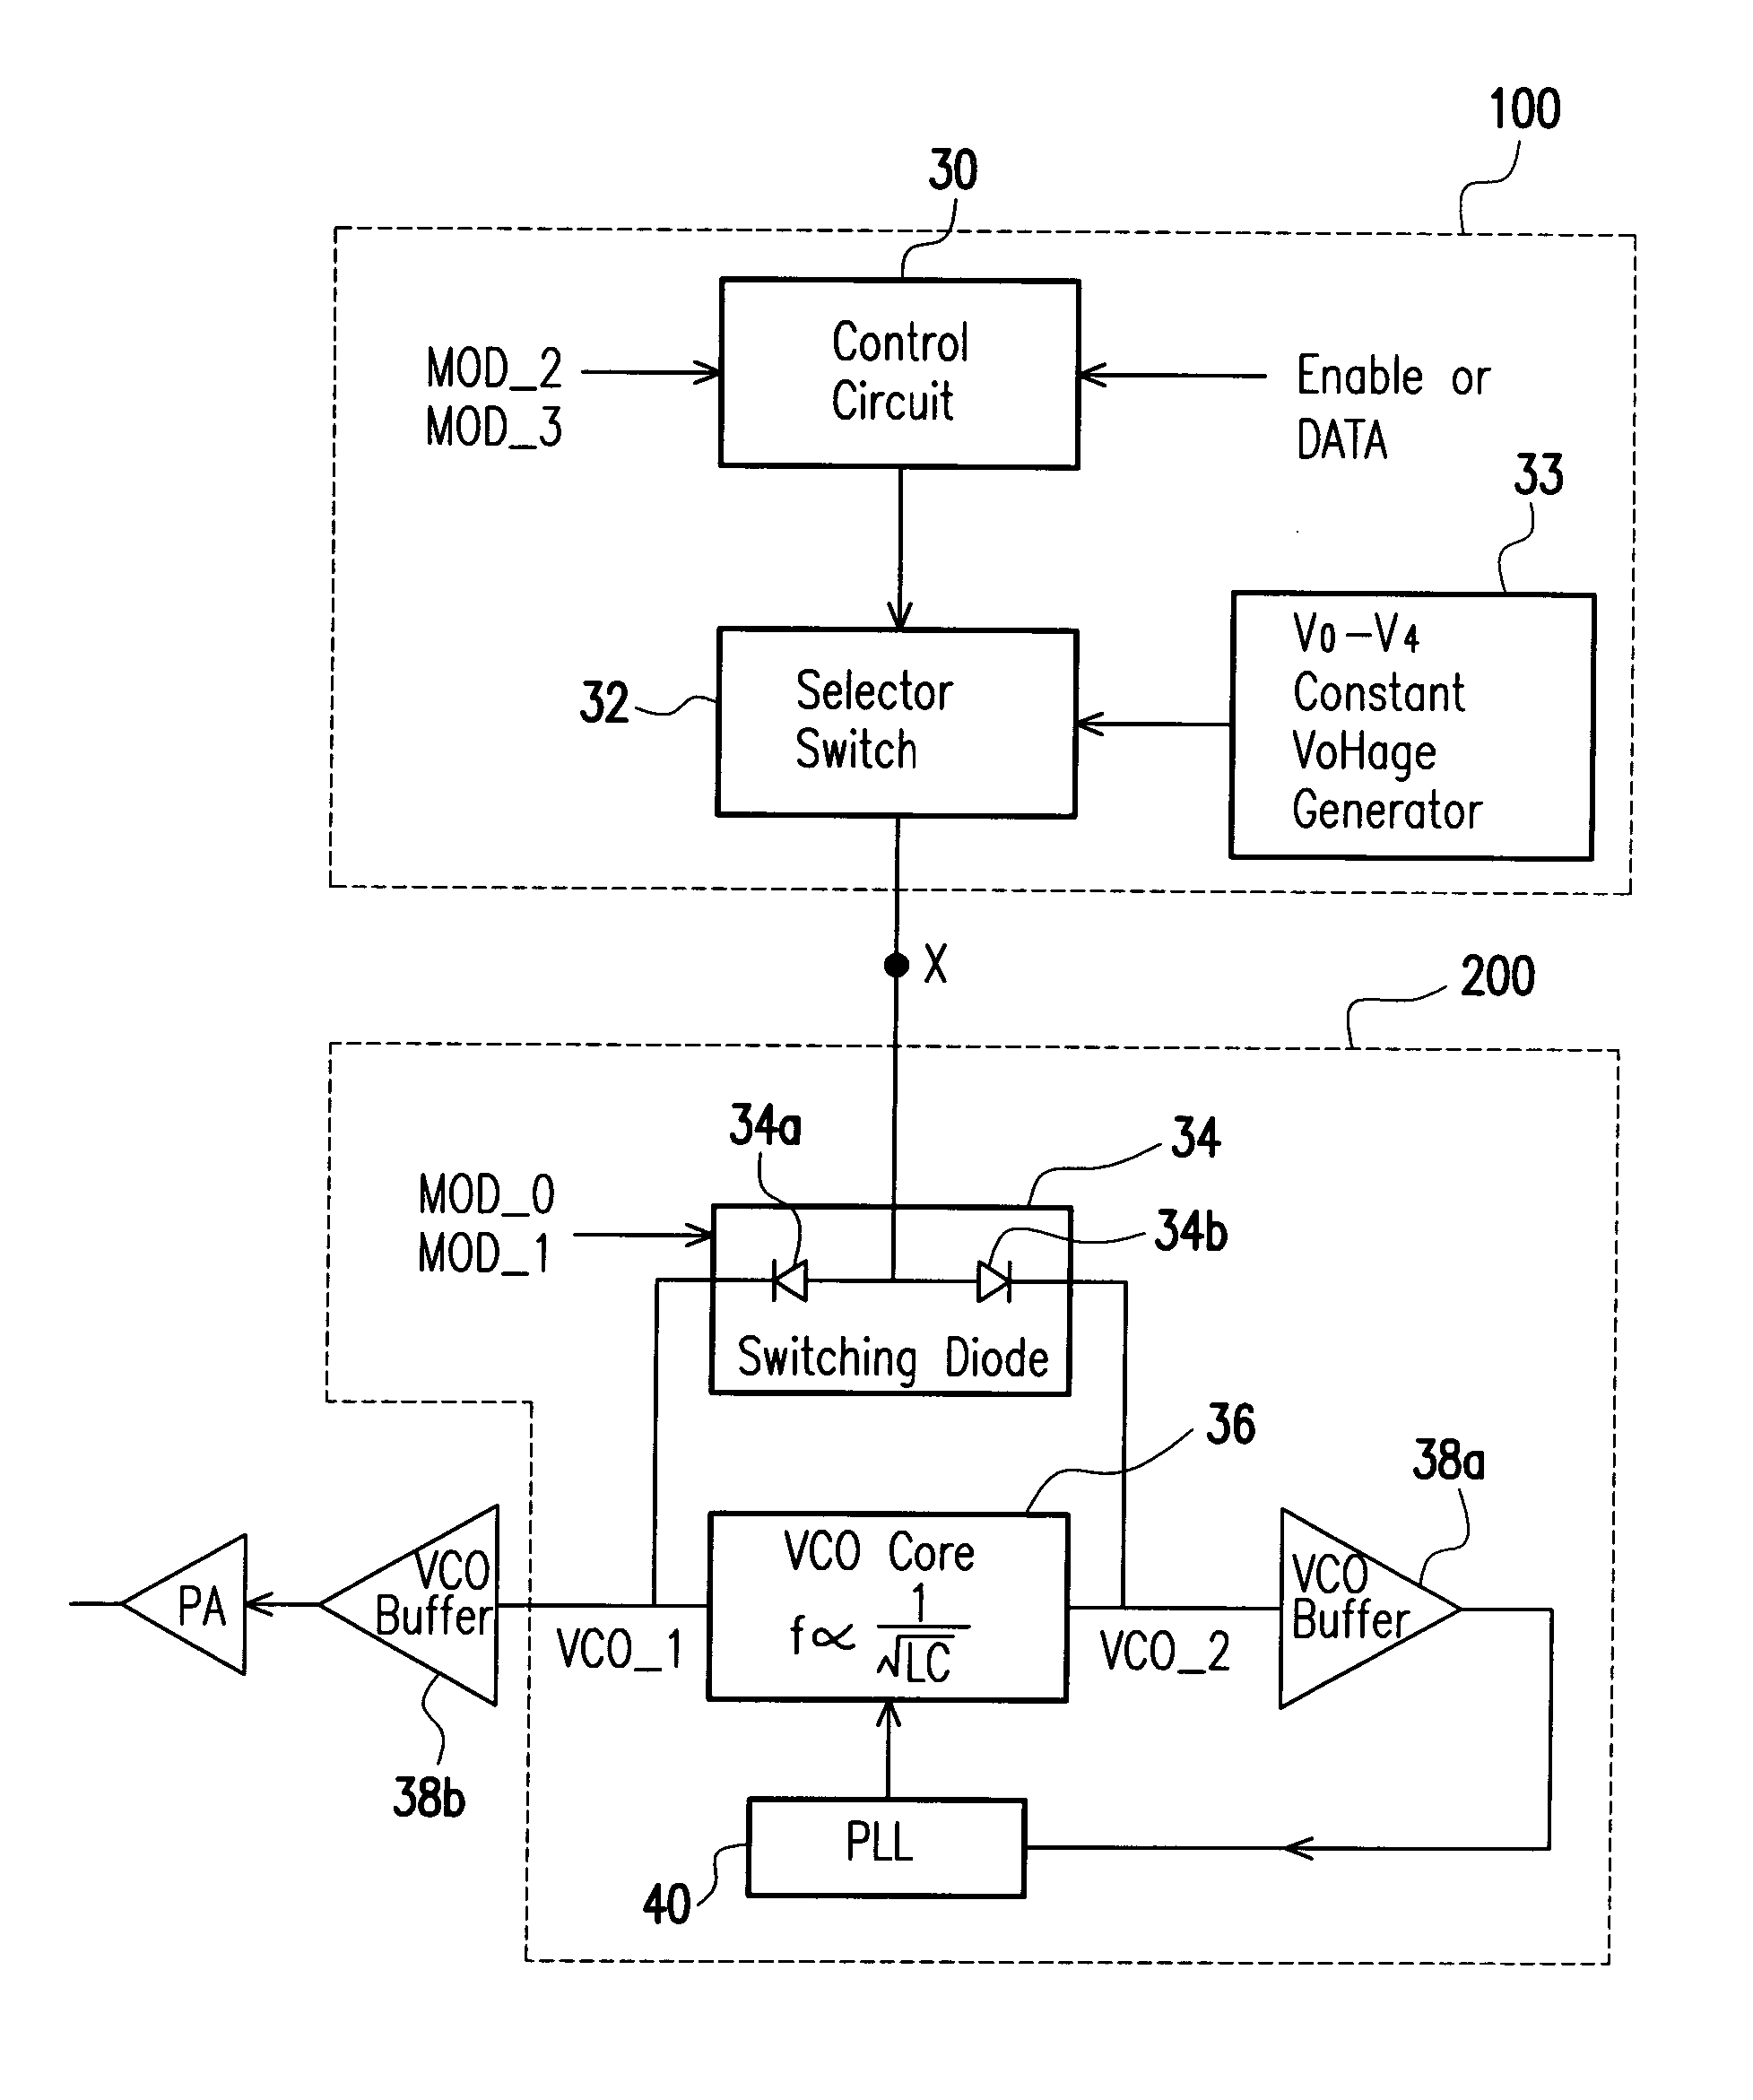 Voltage controlled oscillator (VCO) suitable for use in frequency shift keying (FSK) system